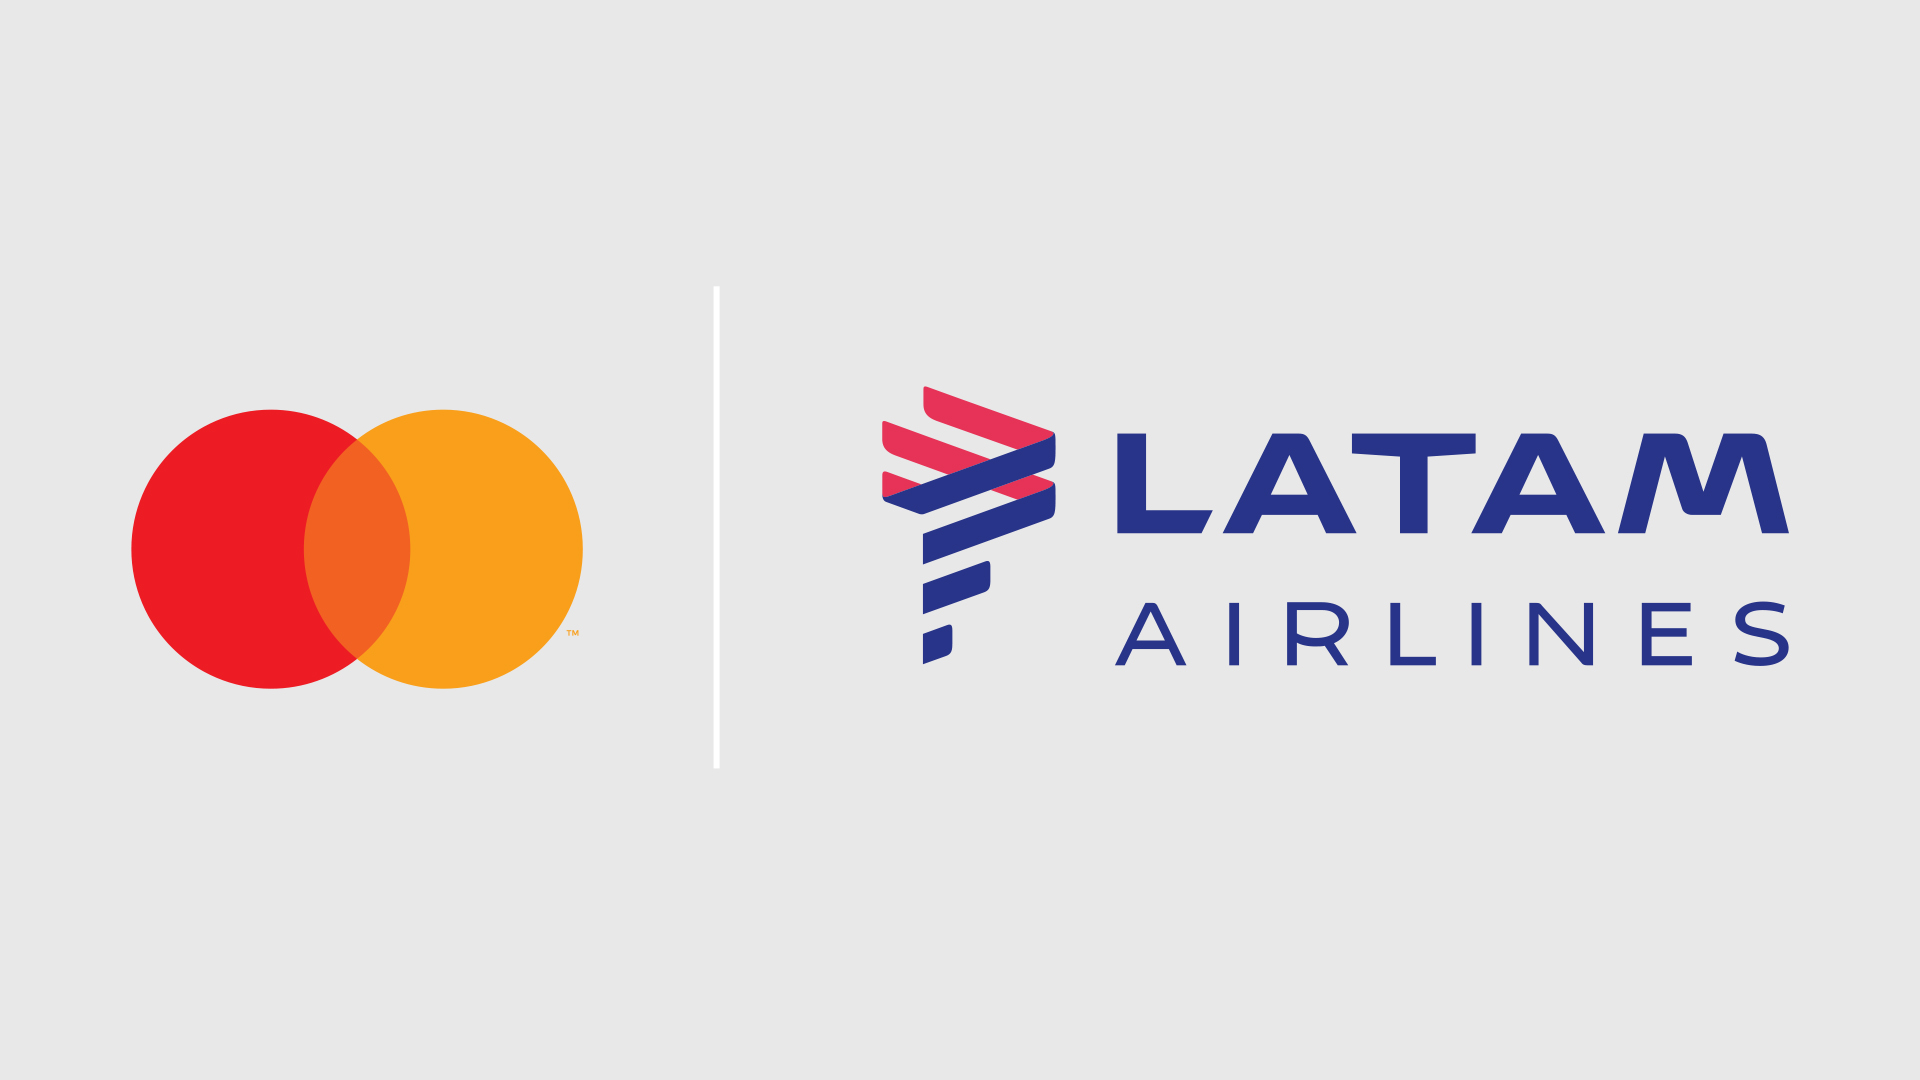 LATAM Cargo adds Miami-Chile freighter and plans European